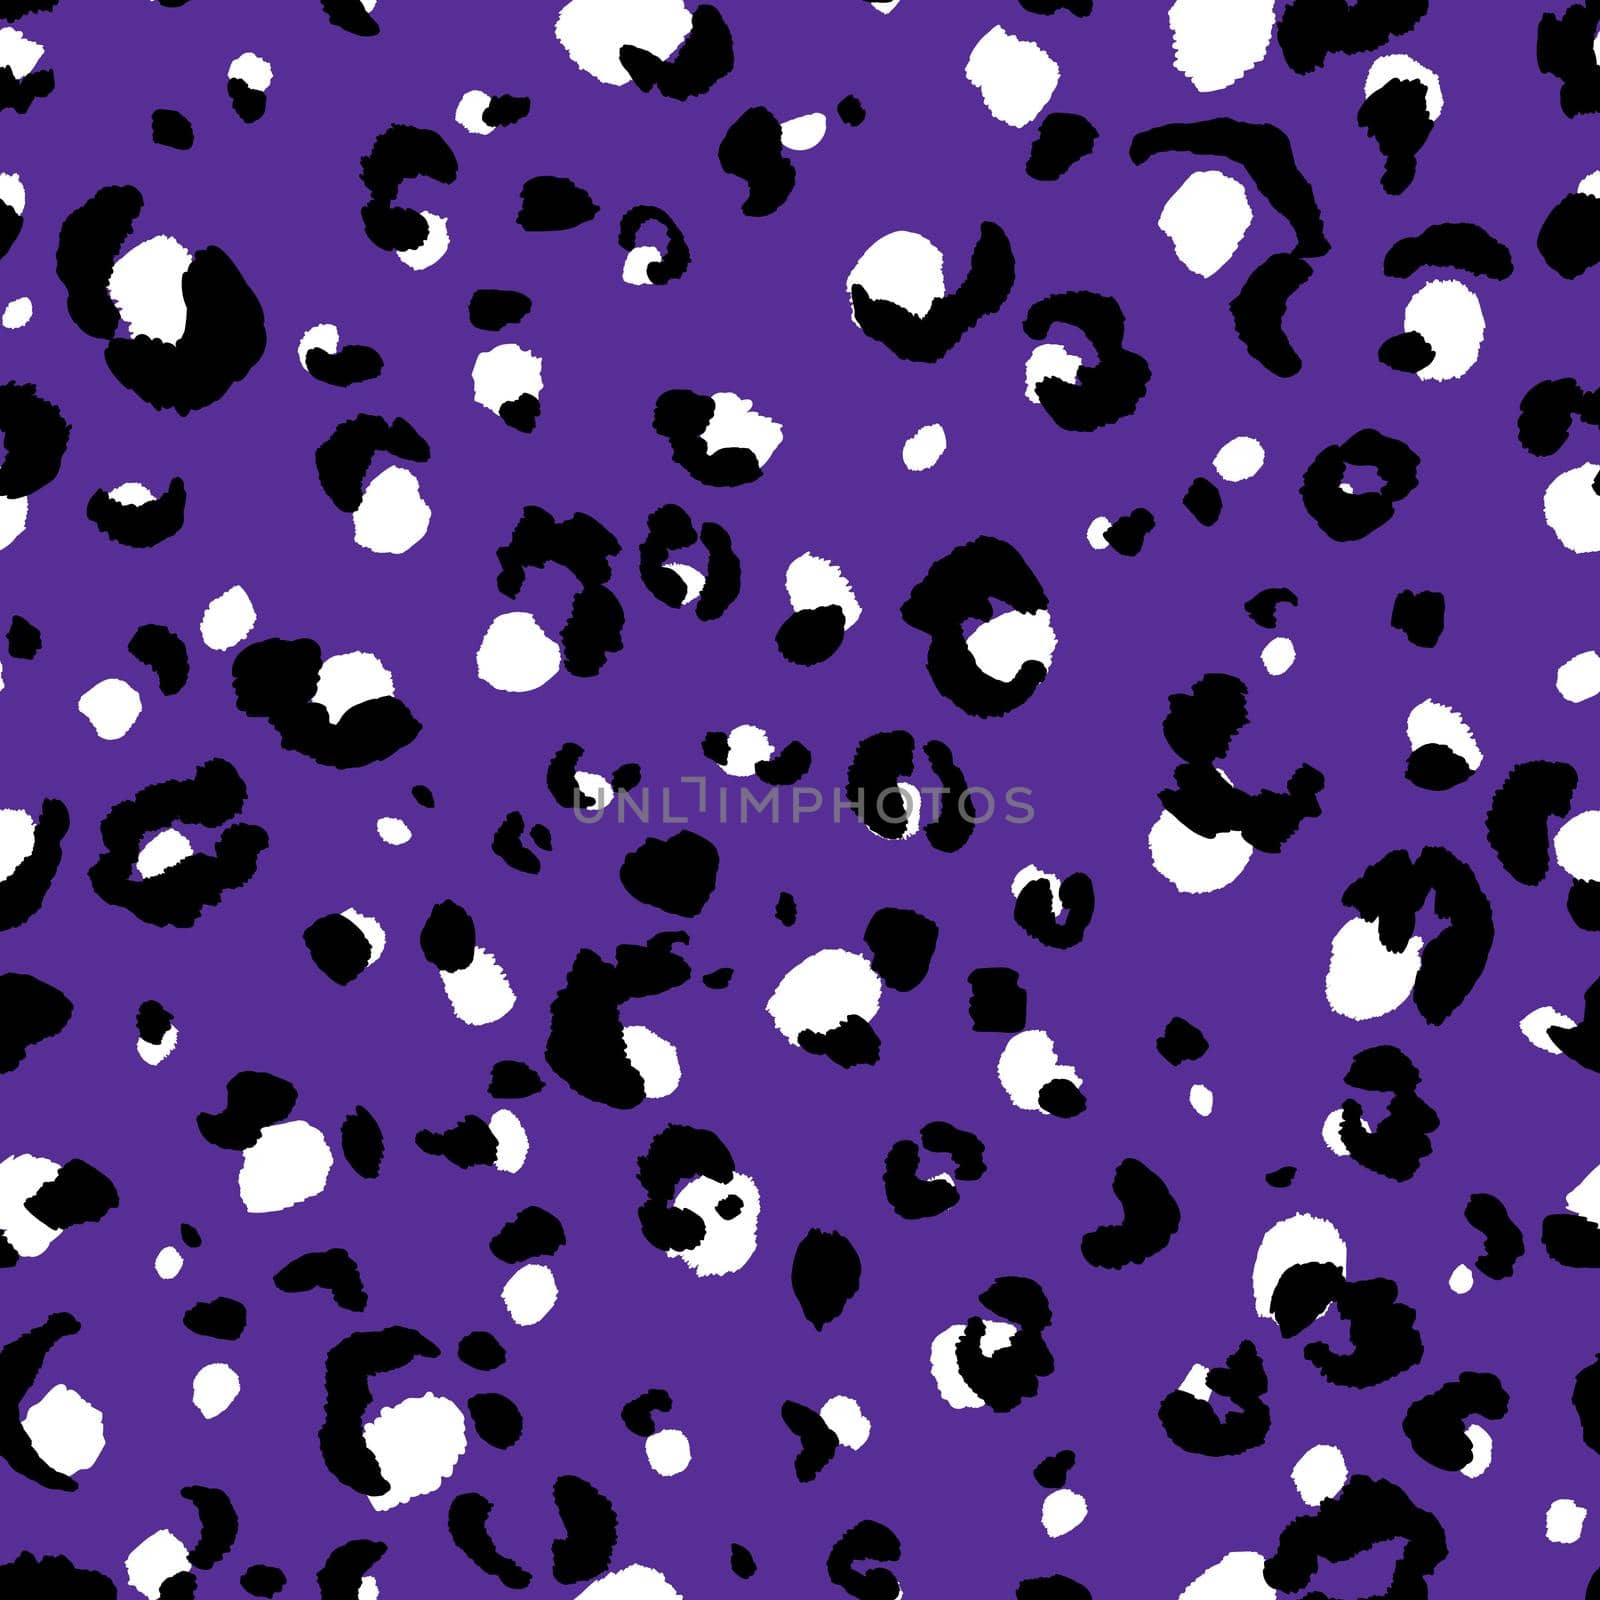 Abstract modern leopard seamless pattern. Animals trendy background. Purple and black decorative vector stock illustration for print, card, postcard, fabric, textile. Modern ornament of stylized skin by allaku